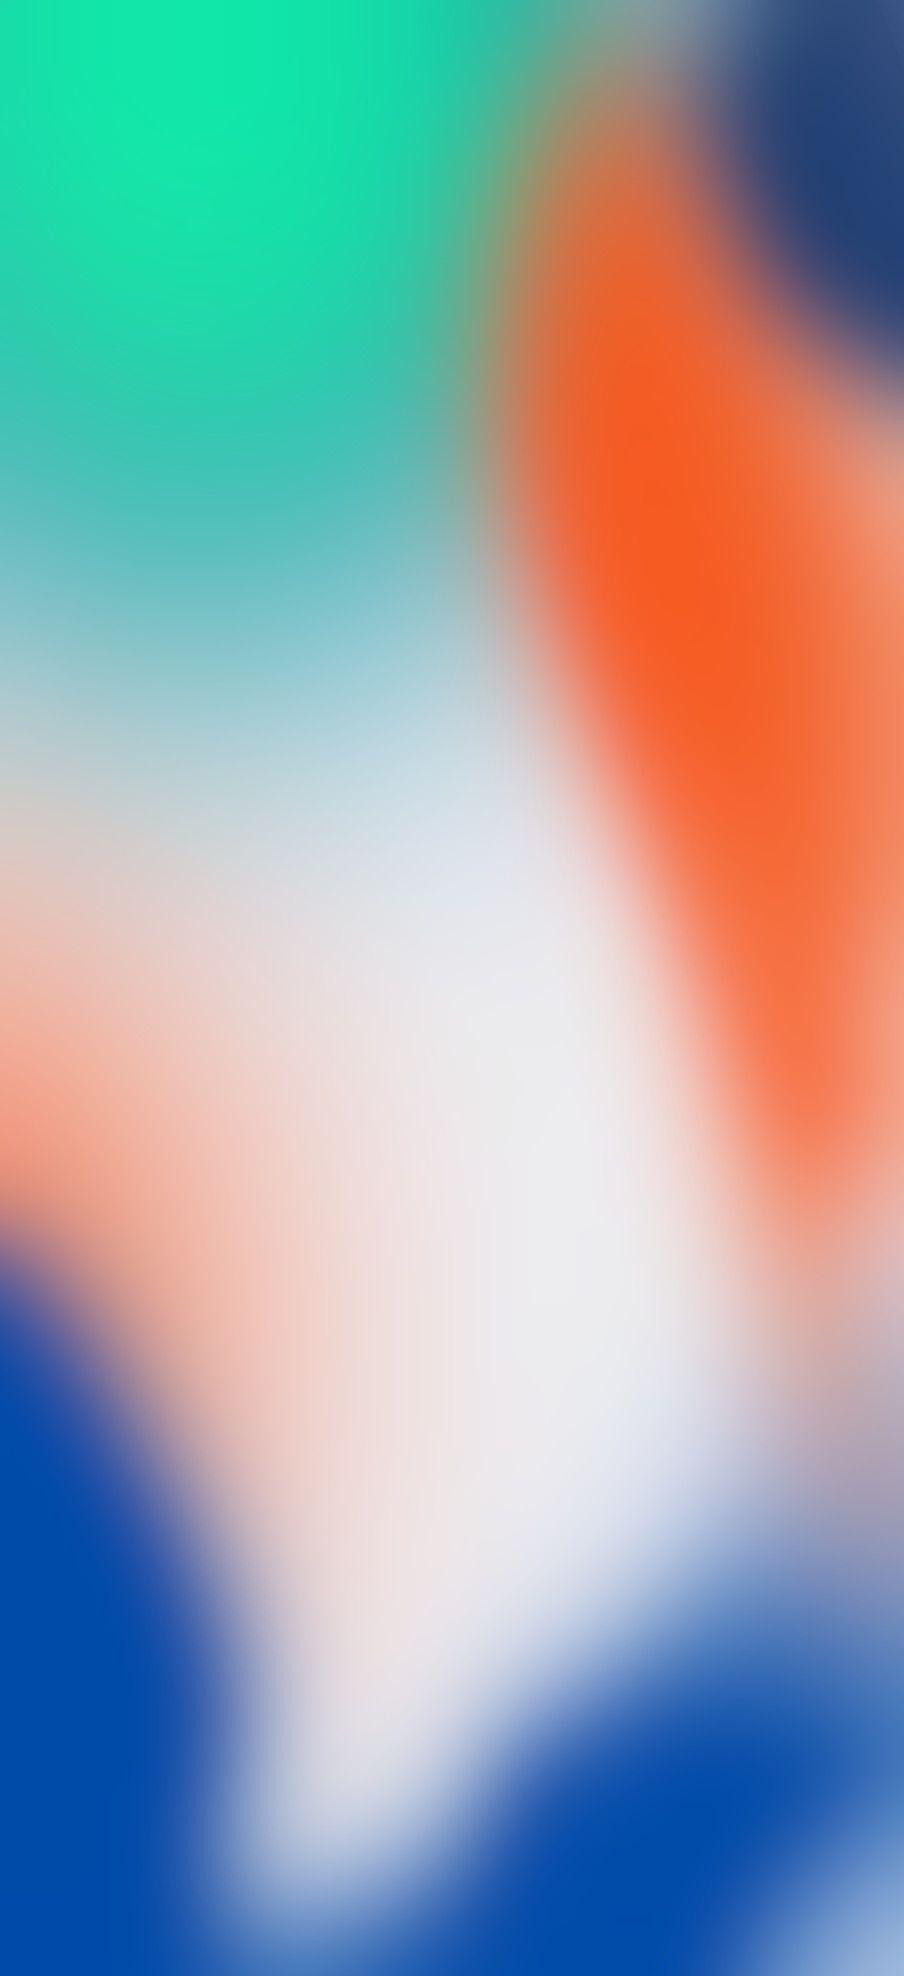 iPhone X Wallpaper Free iPhone X Background